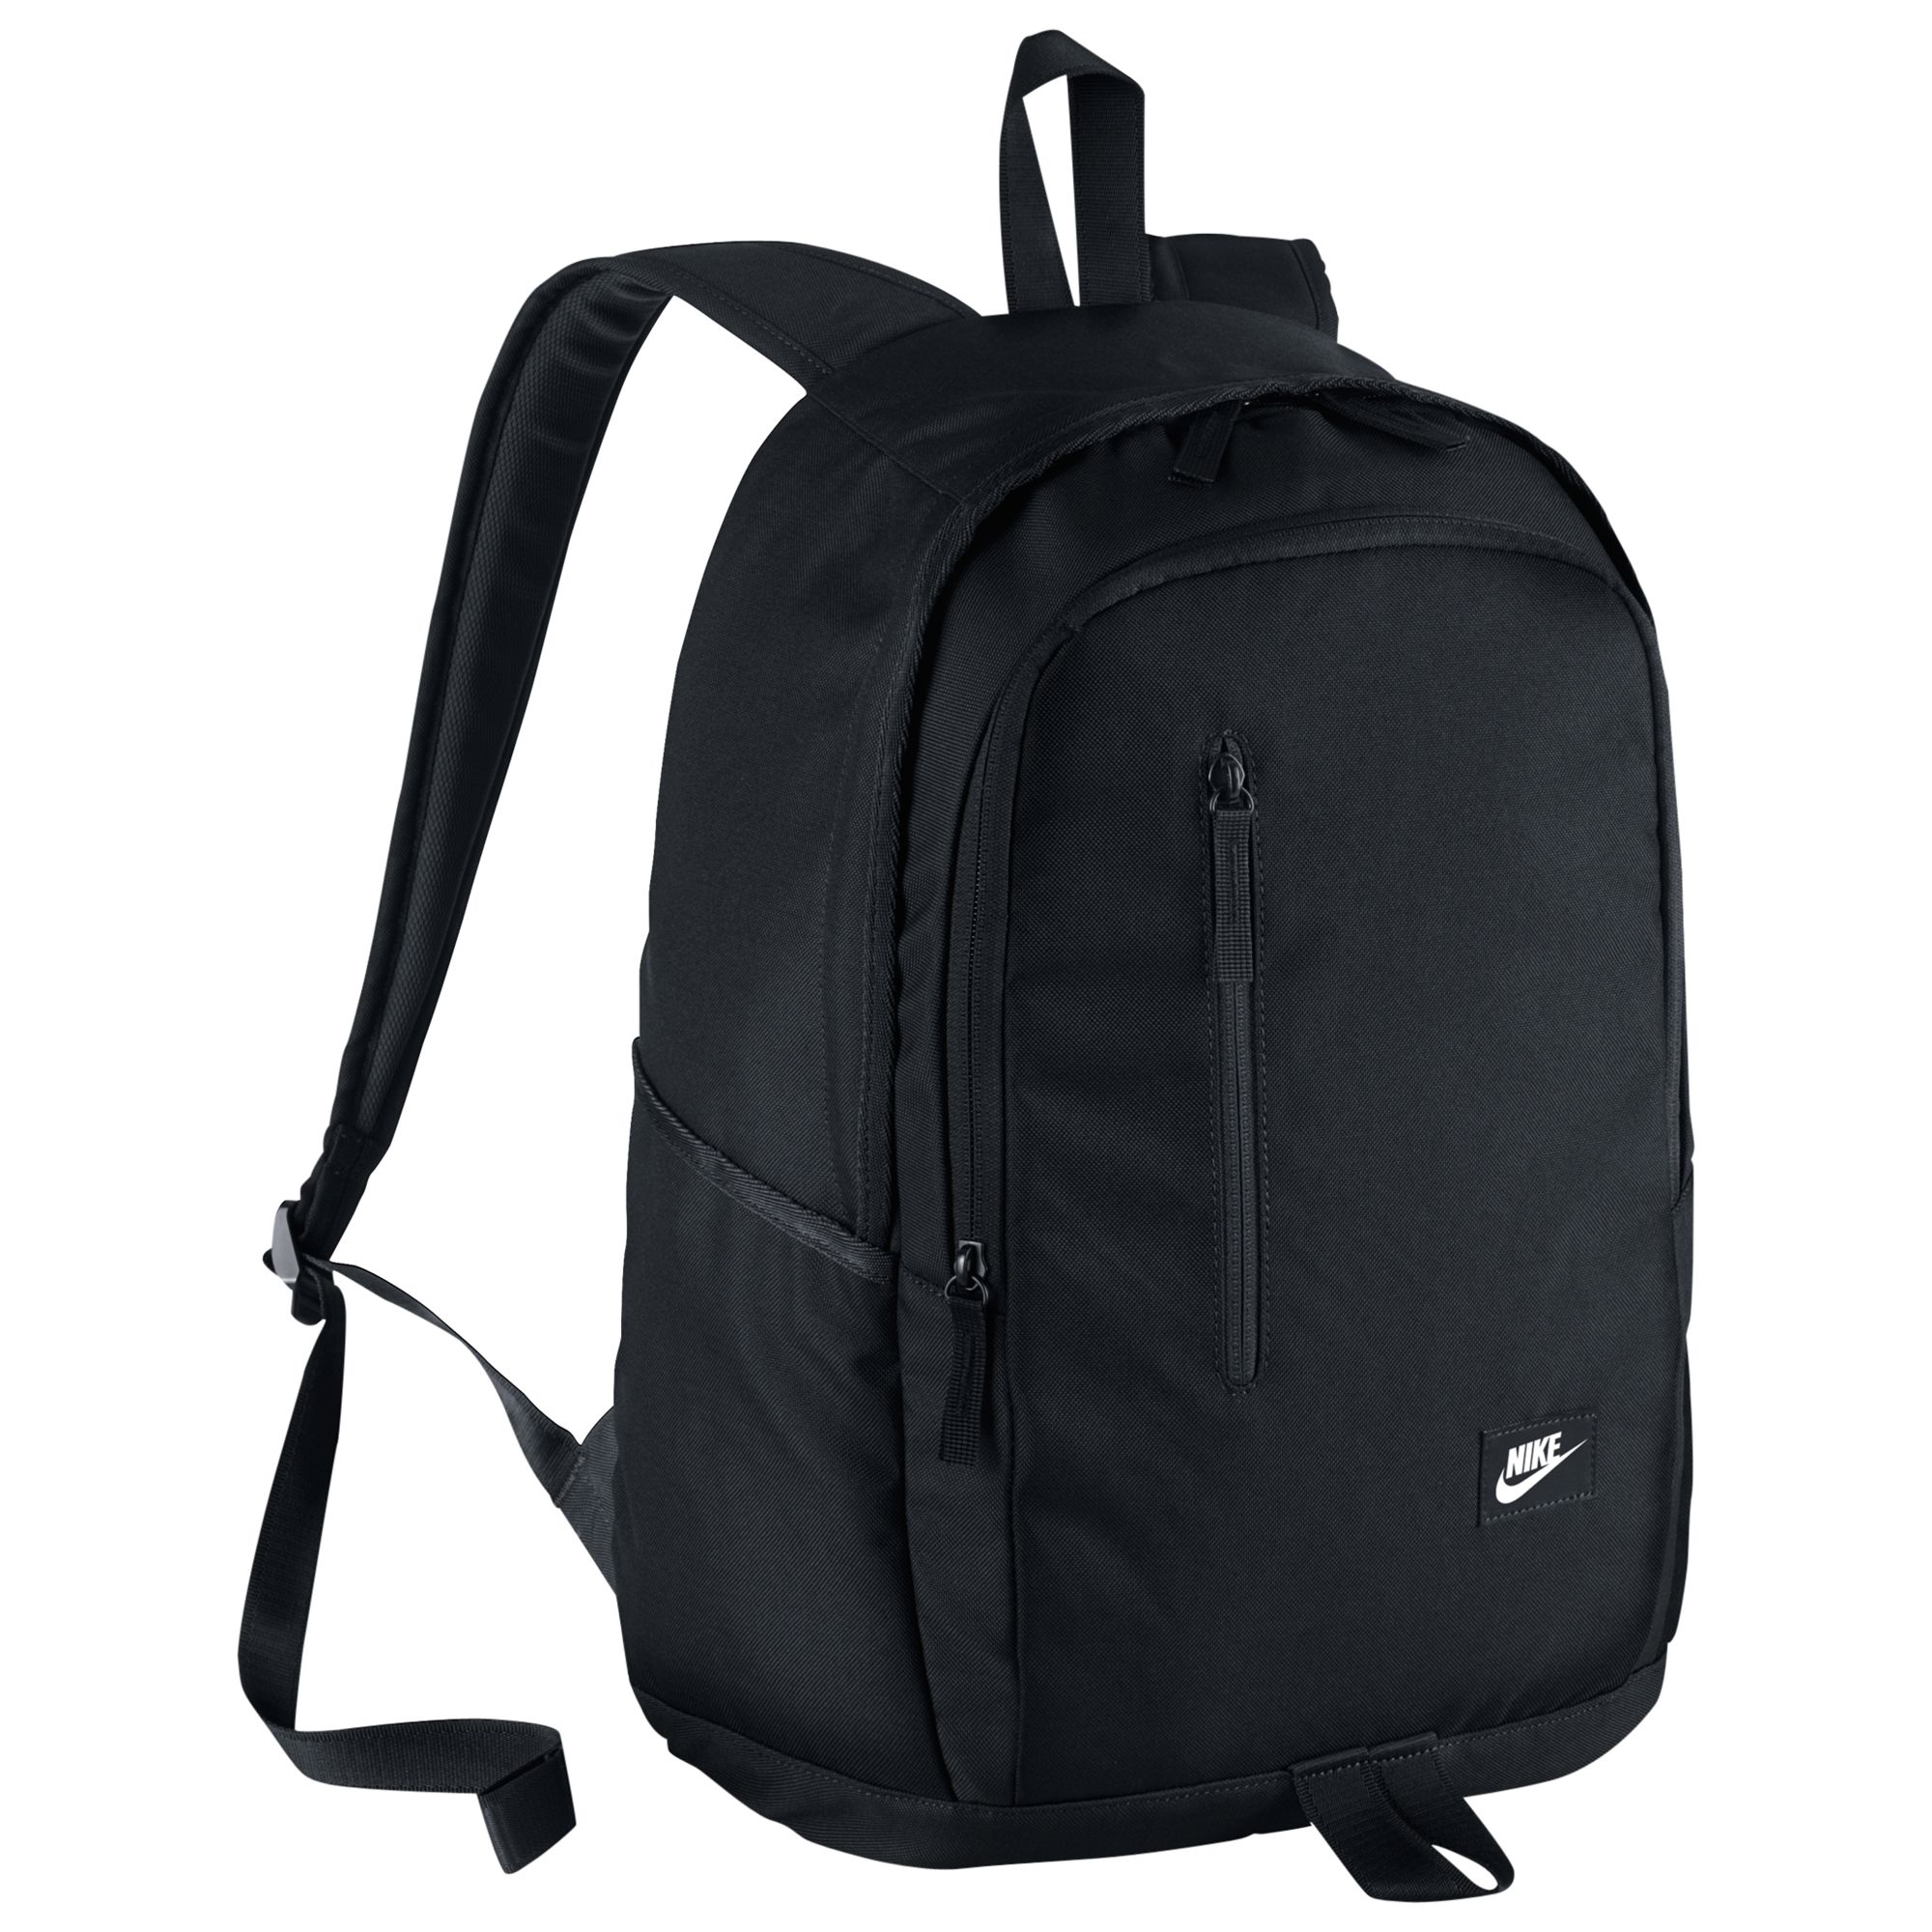 Nike All Access Soleday Backpack, Black 